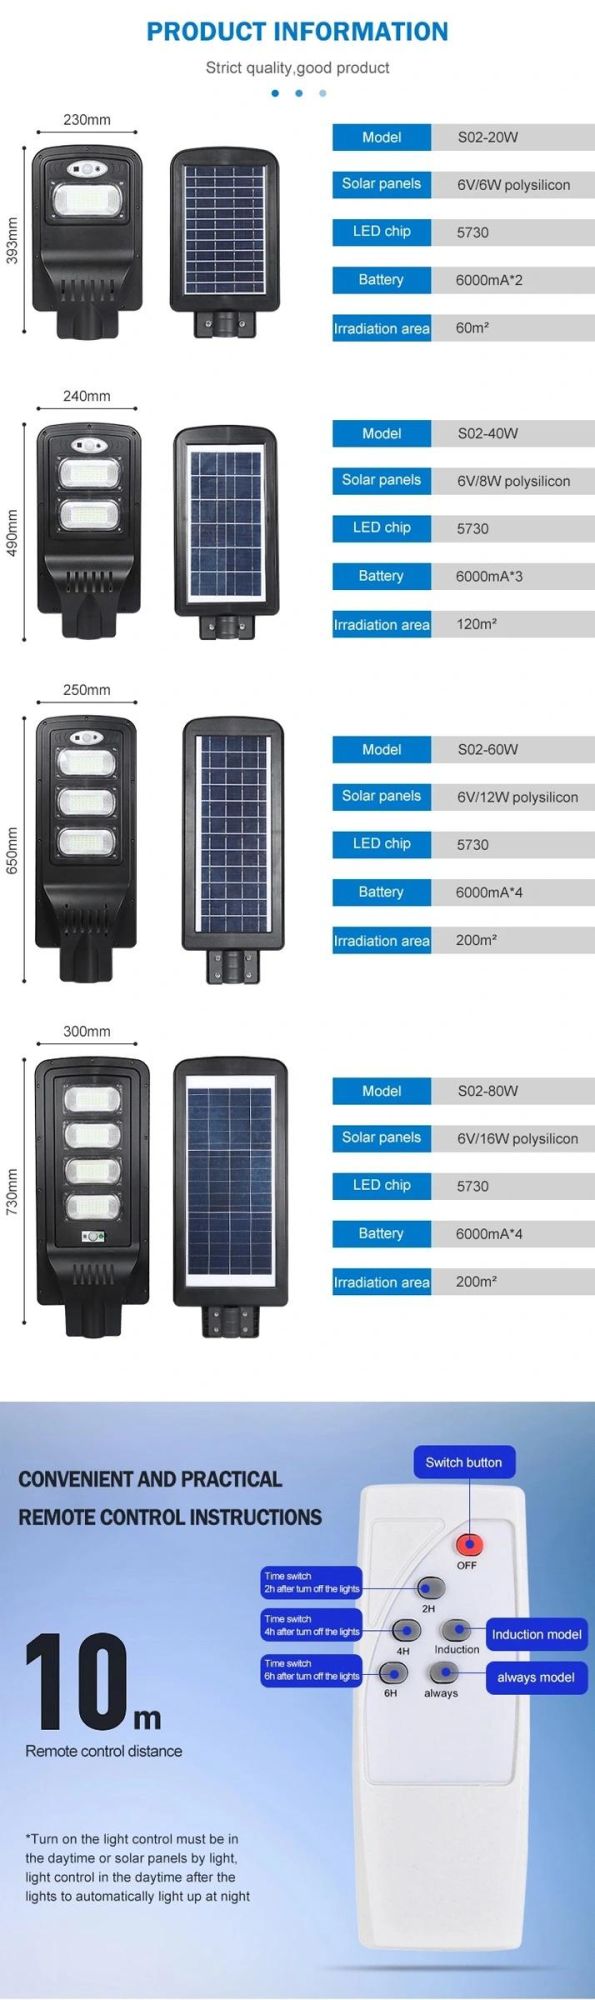 ABS Outdoor Waterproof Square Lighting, 20W 40W 60W 80W Integrated Solar LED Street Light, High Lumen Energy Saving Power System Home Portable Light